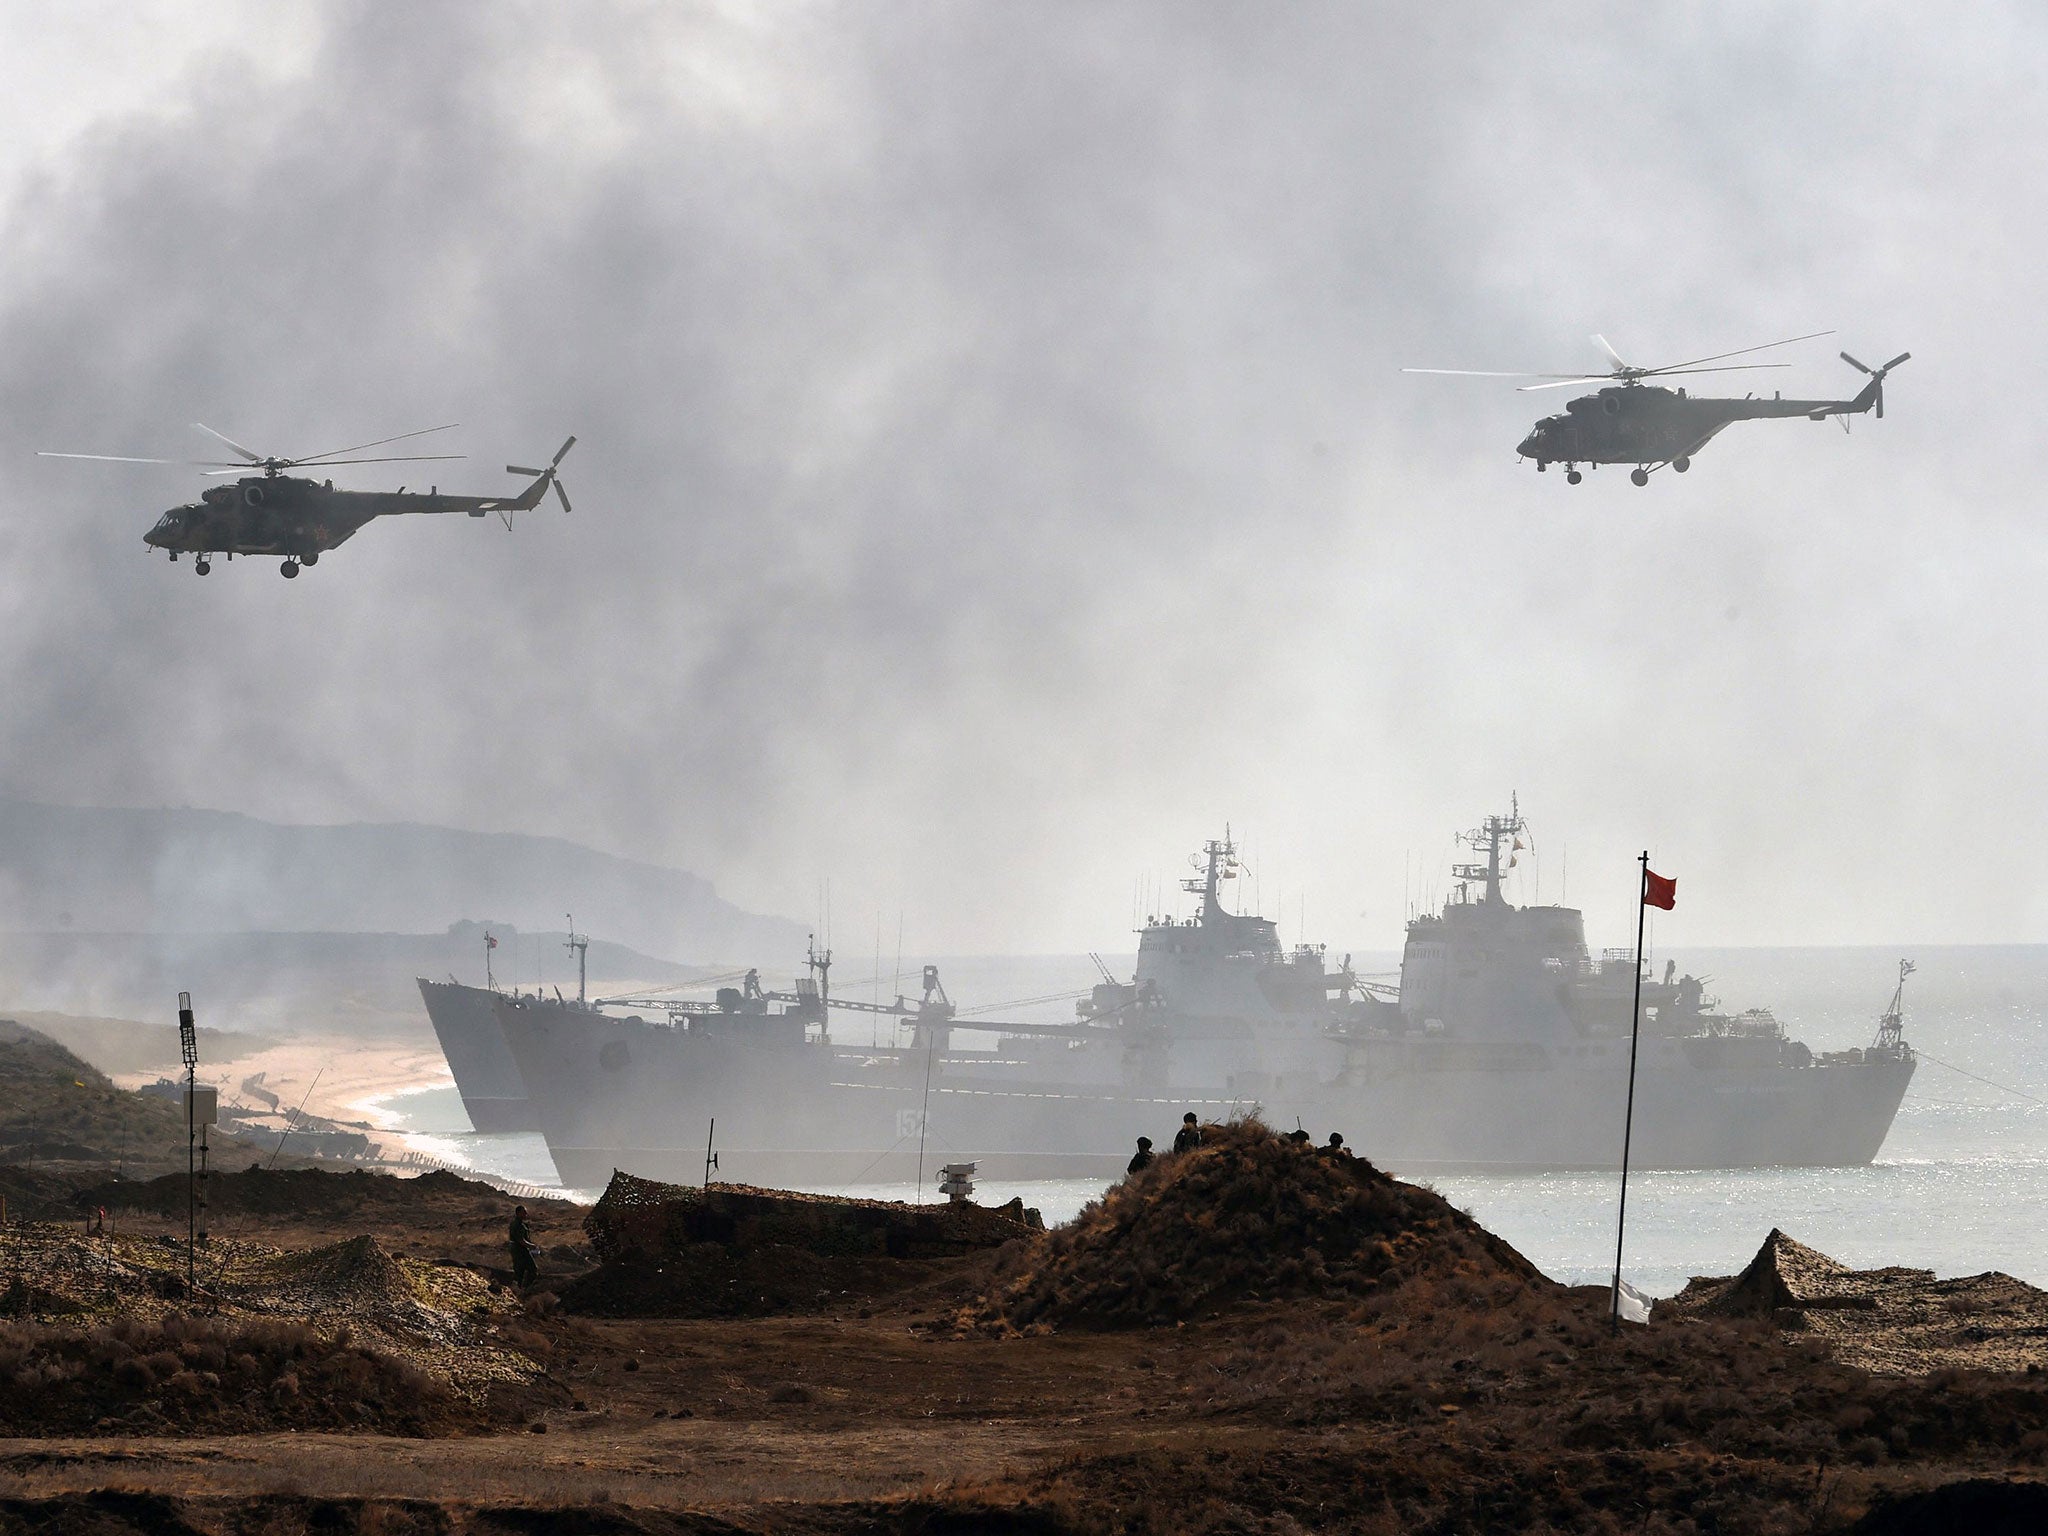 Russia's navy ships and helicopters take part in a military exercise off the coast of the Black Sea in Crimea in September 2016